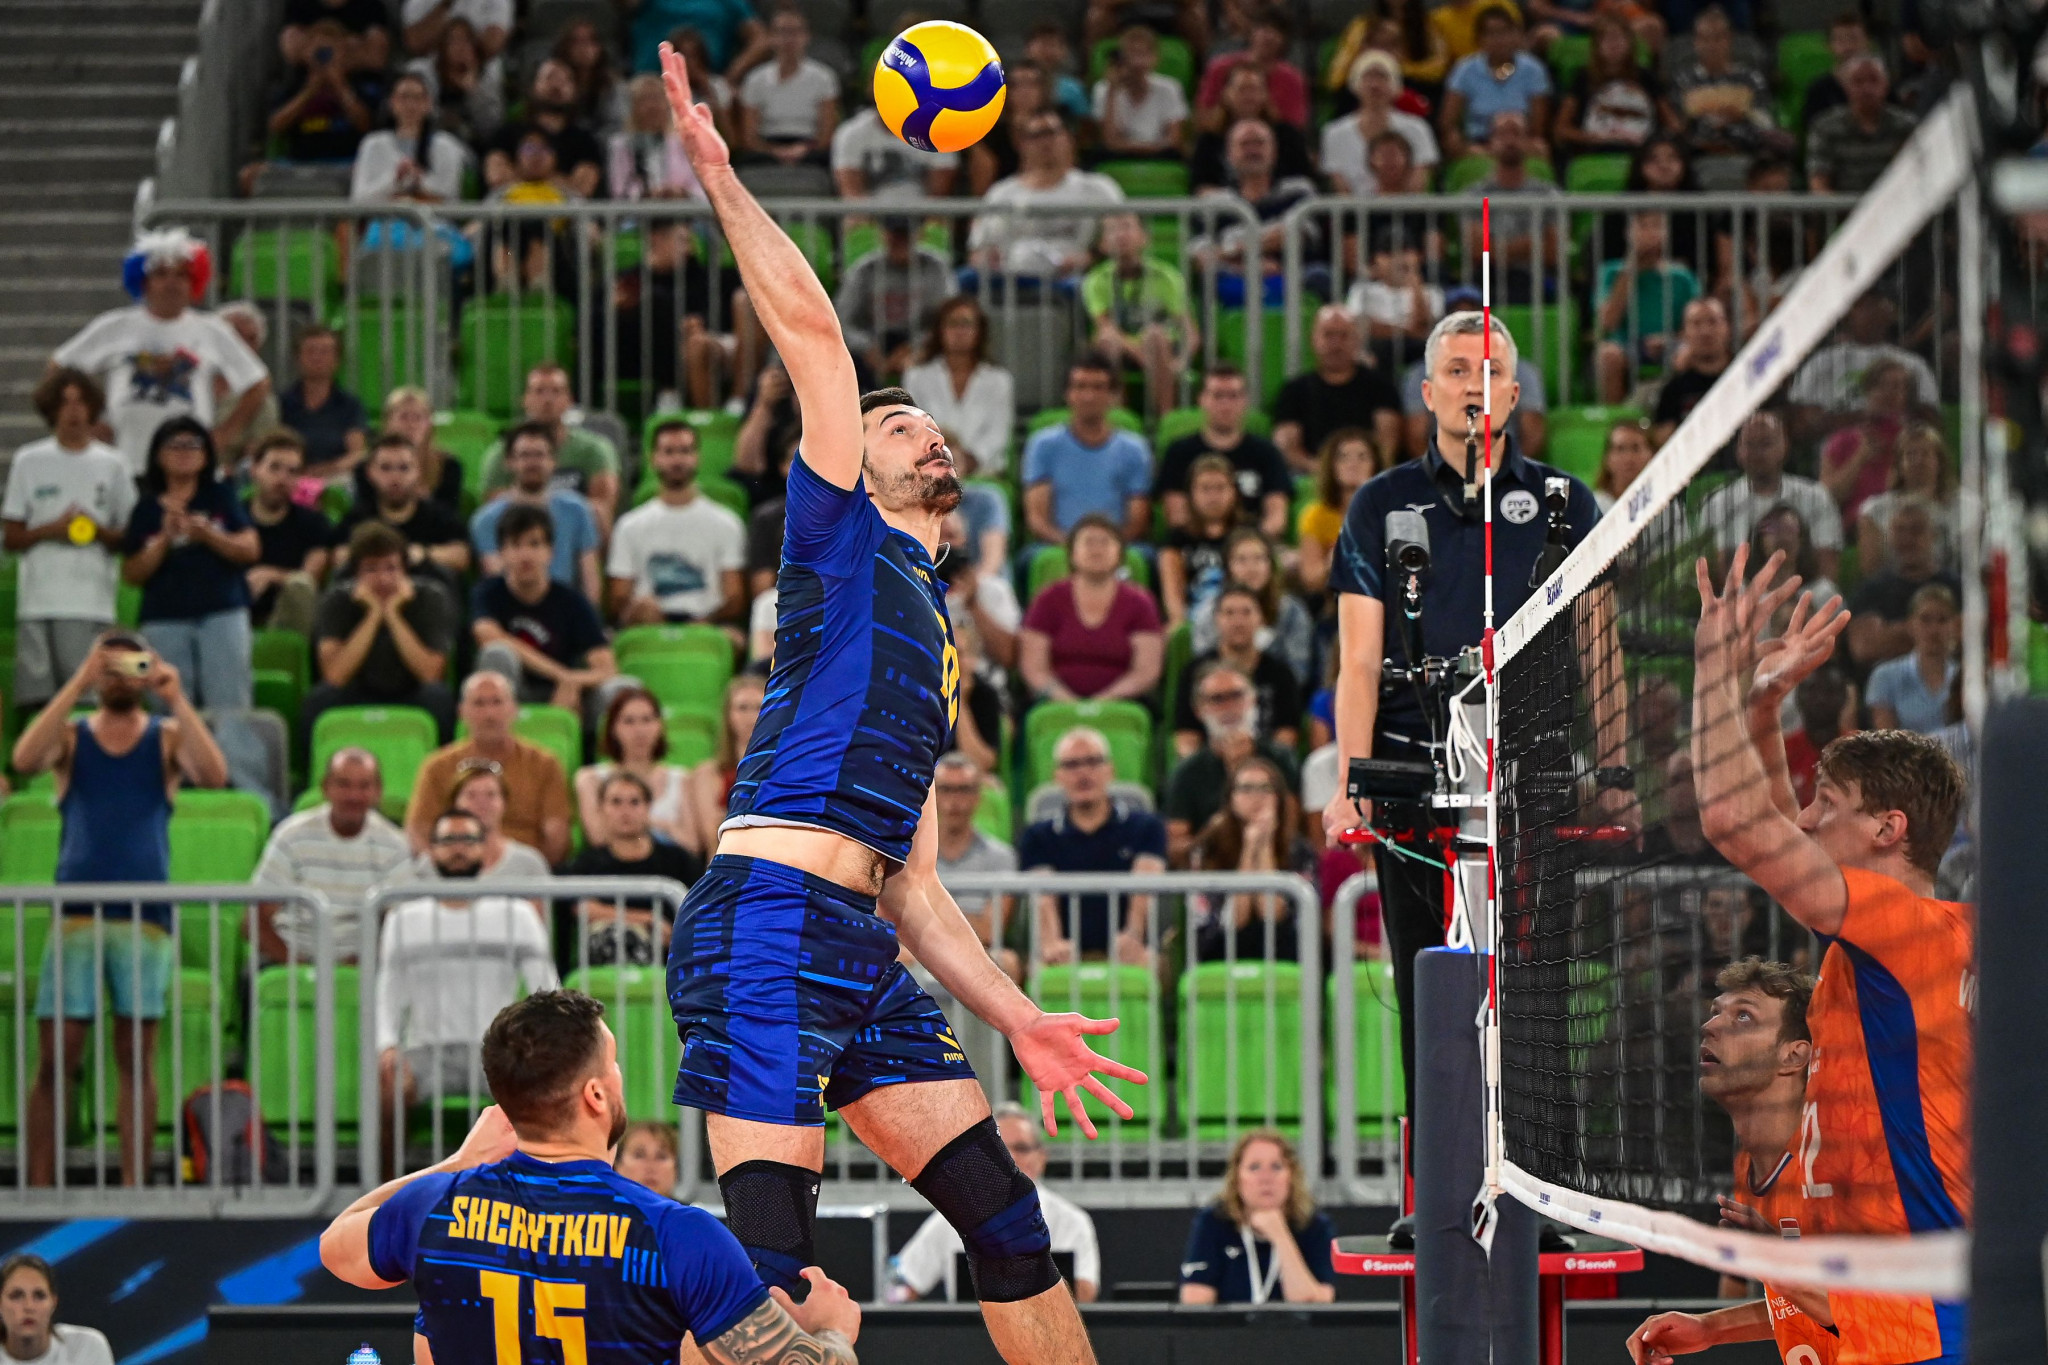 Ukraine sprung a surprise with a straight sets win over Netherlands to reach the Men's Volleyball World Championship quarter-finals ©Getty Images